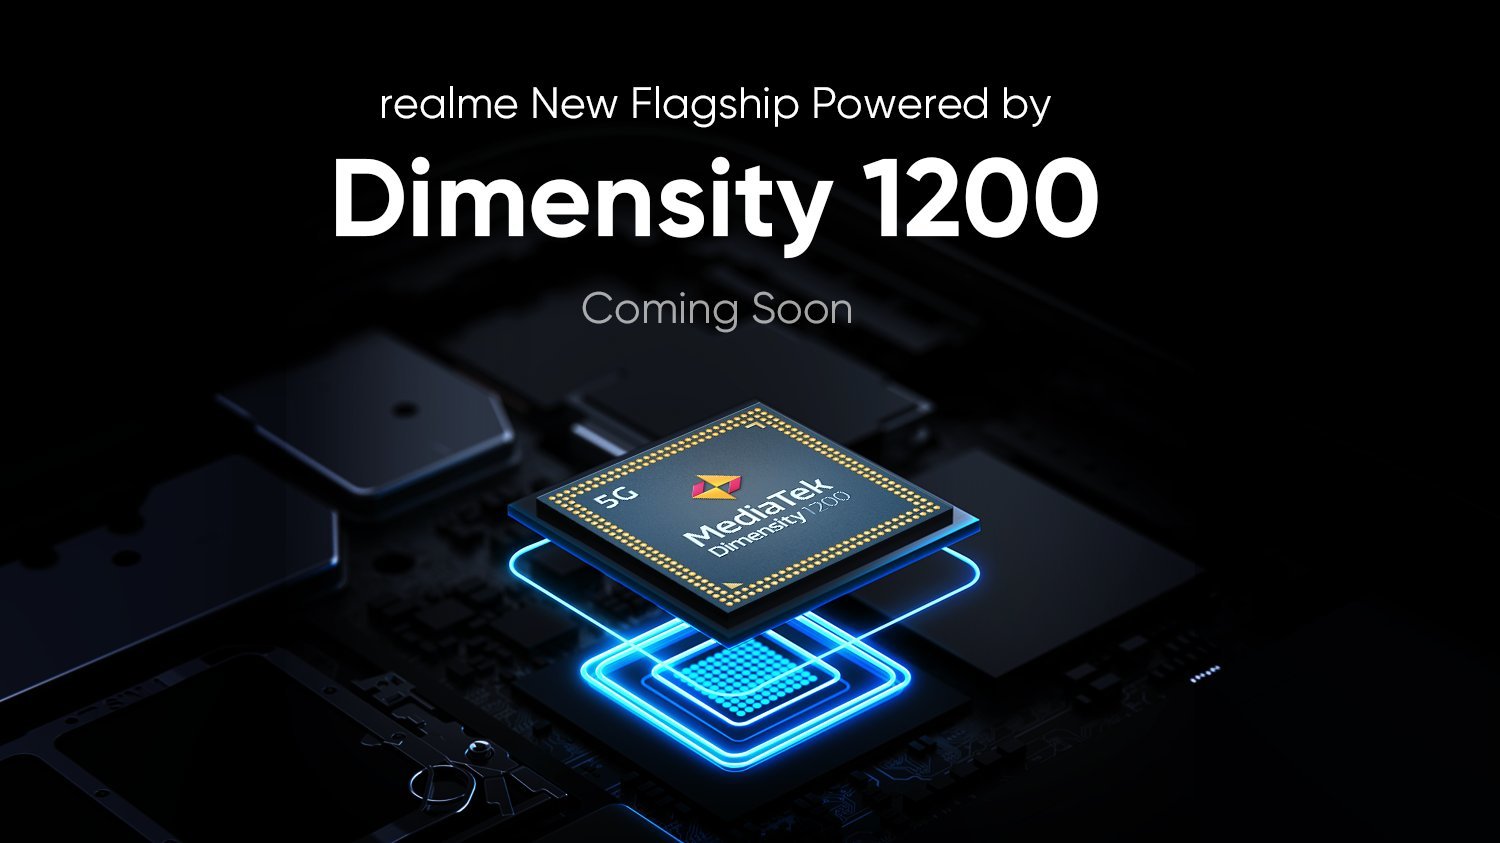 MediaTek's Dimensity 1100 & 1200 goes official with up to 3.0GHz | DroidAfrica